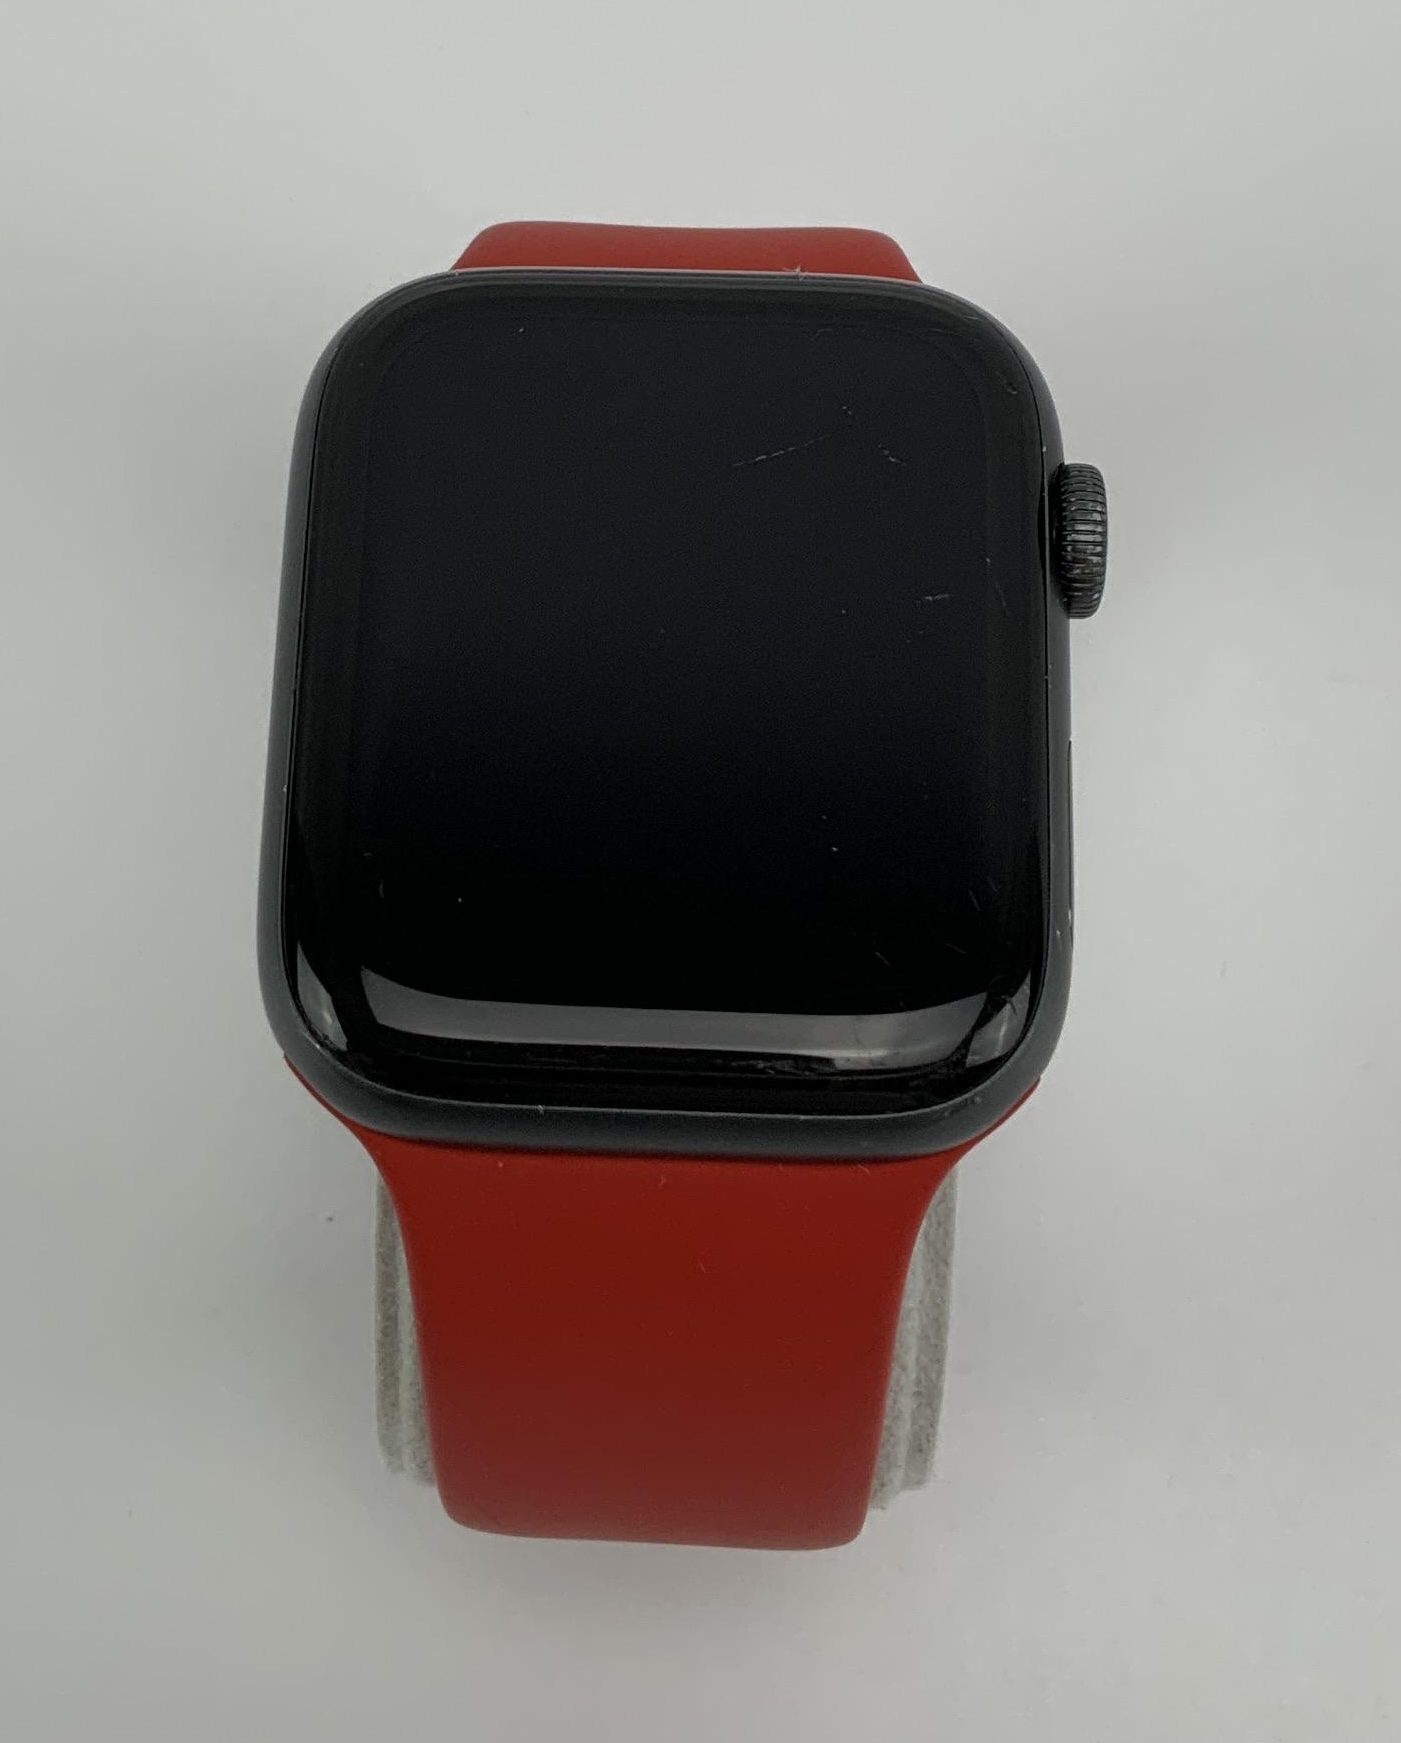 Watch Series 5 Aluminum (44mm), Space Gray, image 1